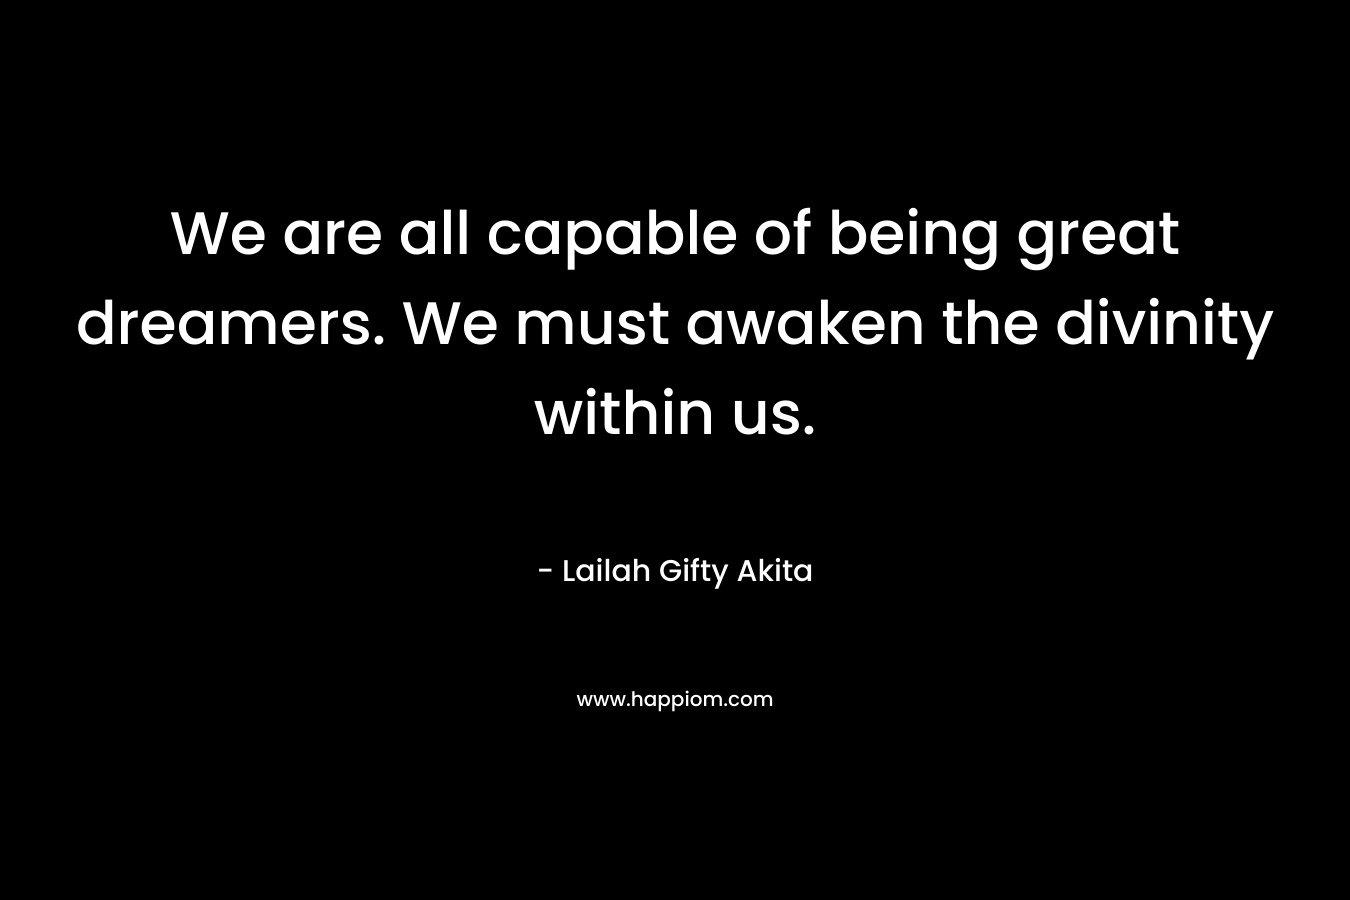 We are all capable of being great dreamers. We must awaken the divinity within us.